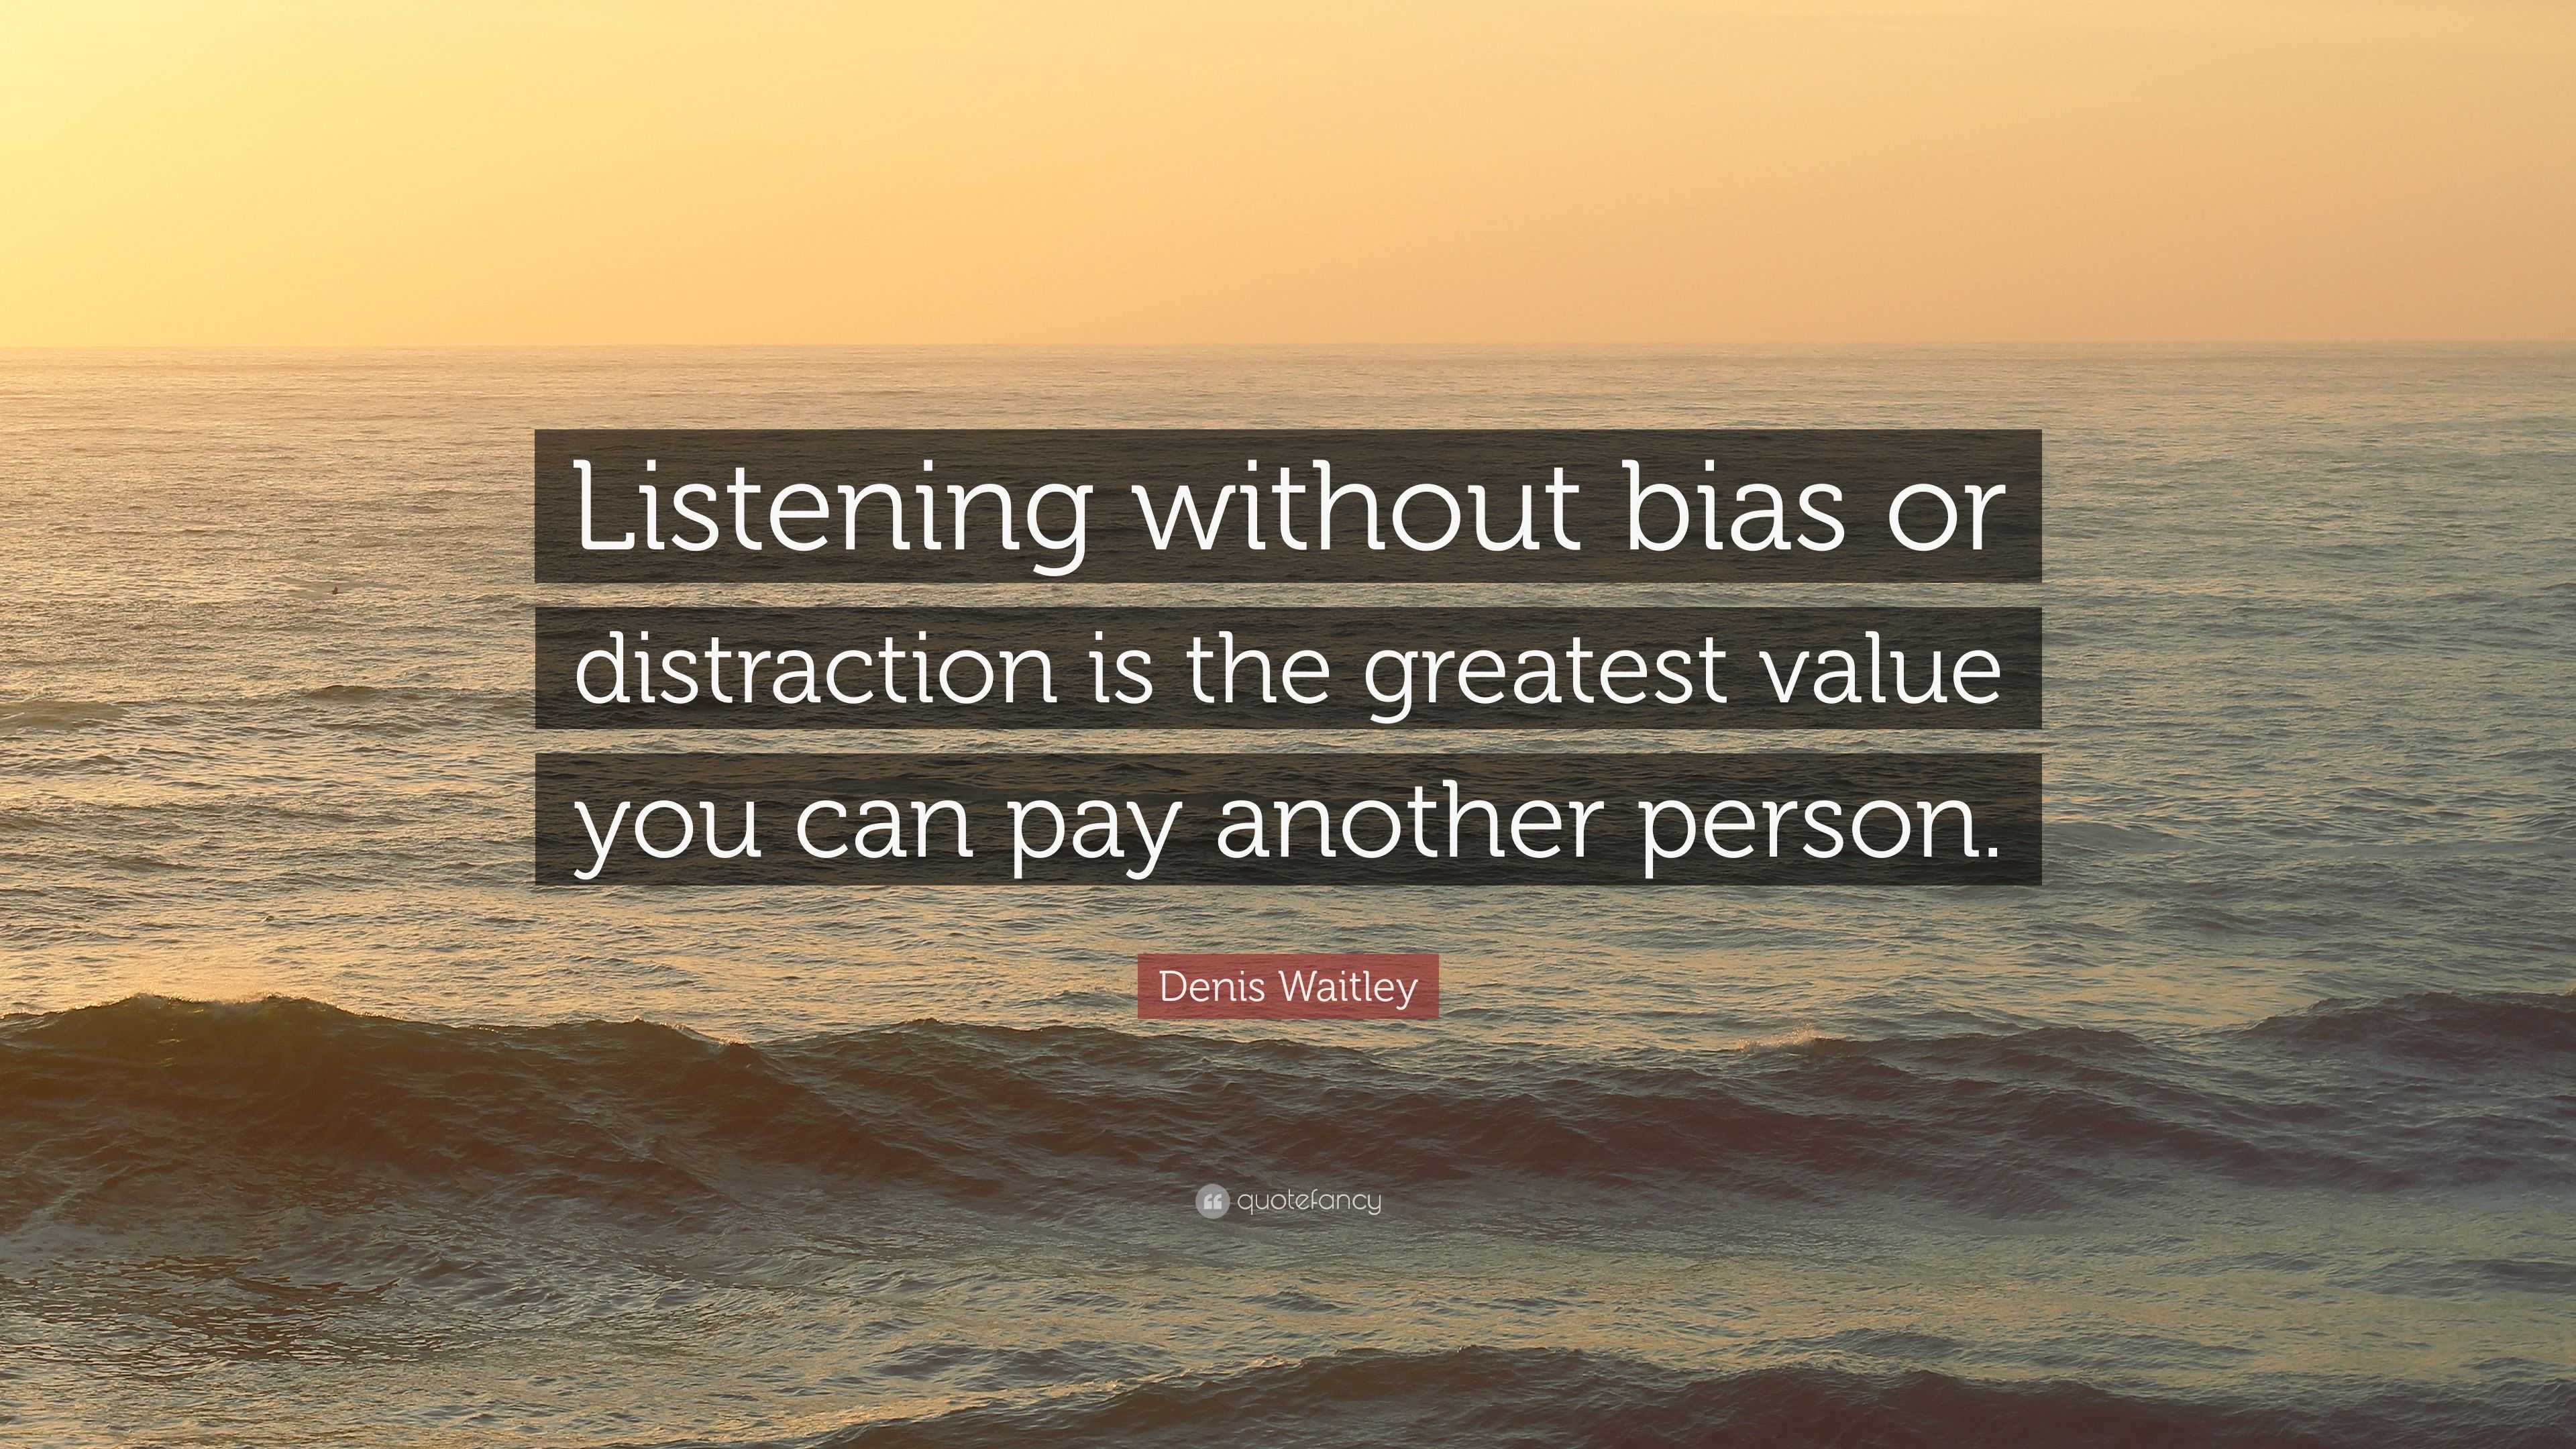 motivational quotes about listening